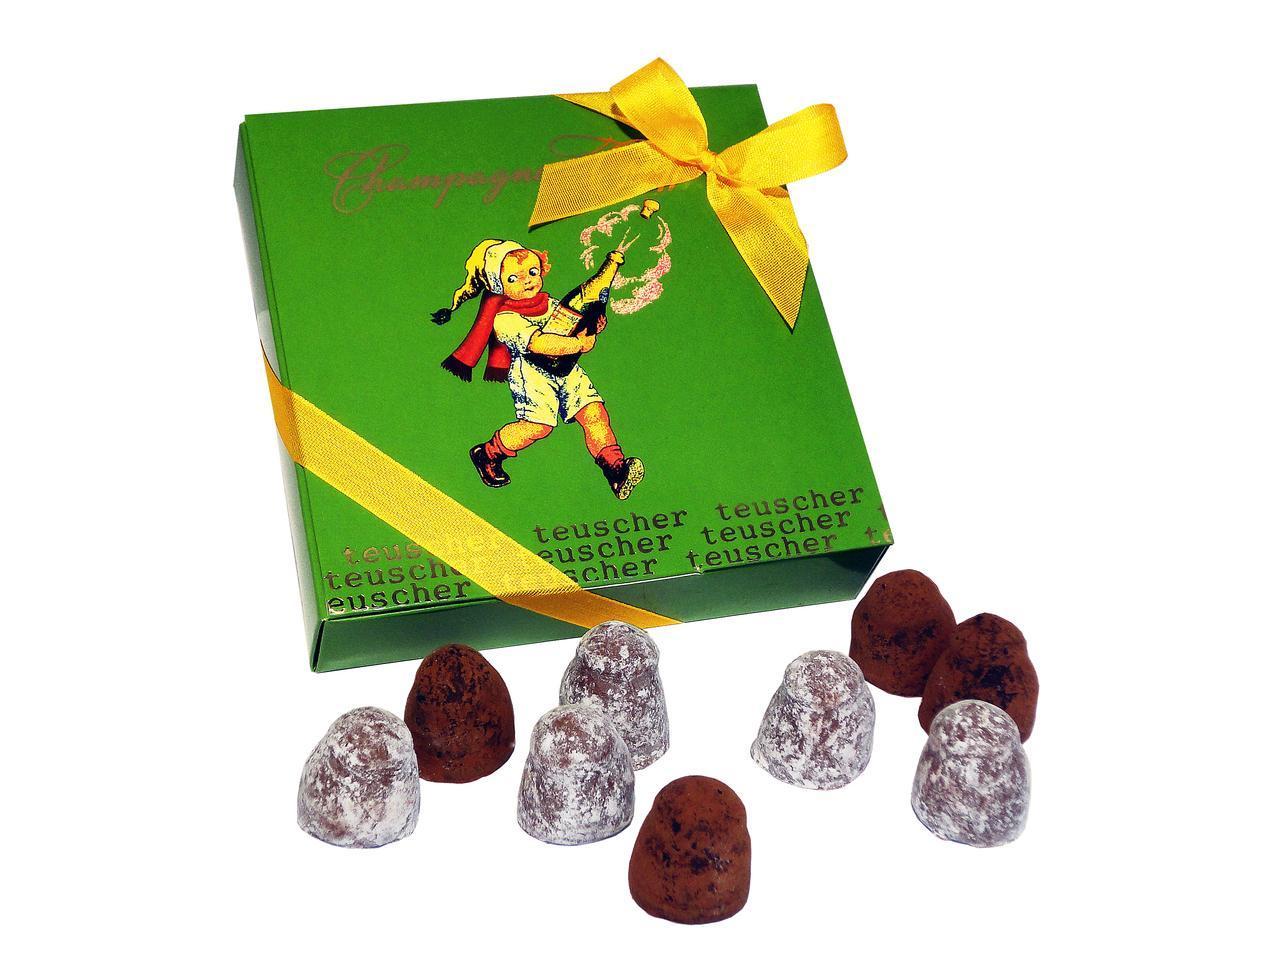 Champagne Truffles Mixed Box (half and half) 4,9,16,24,32,36,48,72 pieces